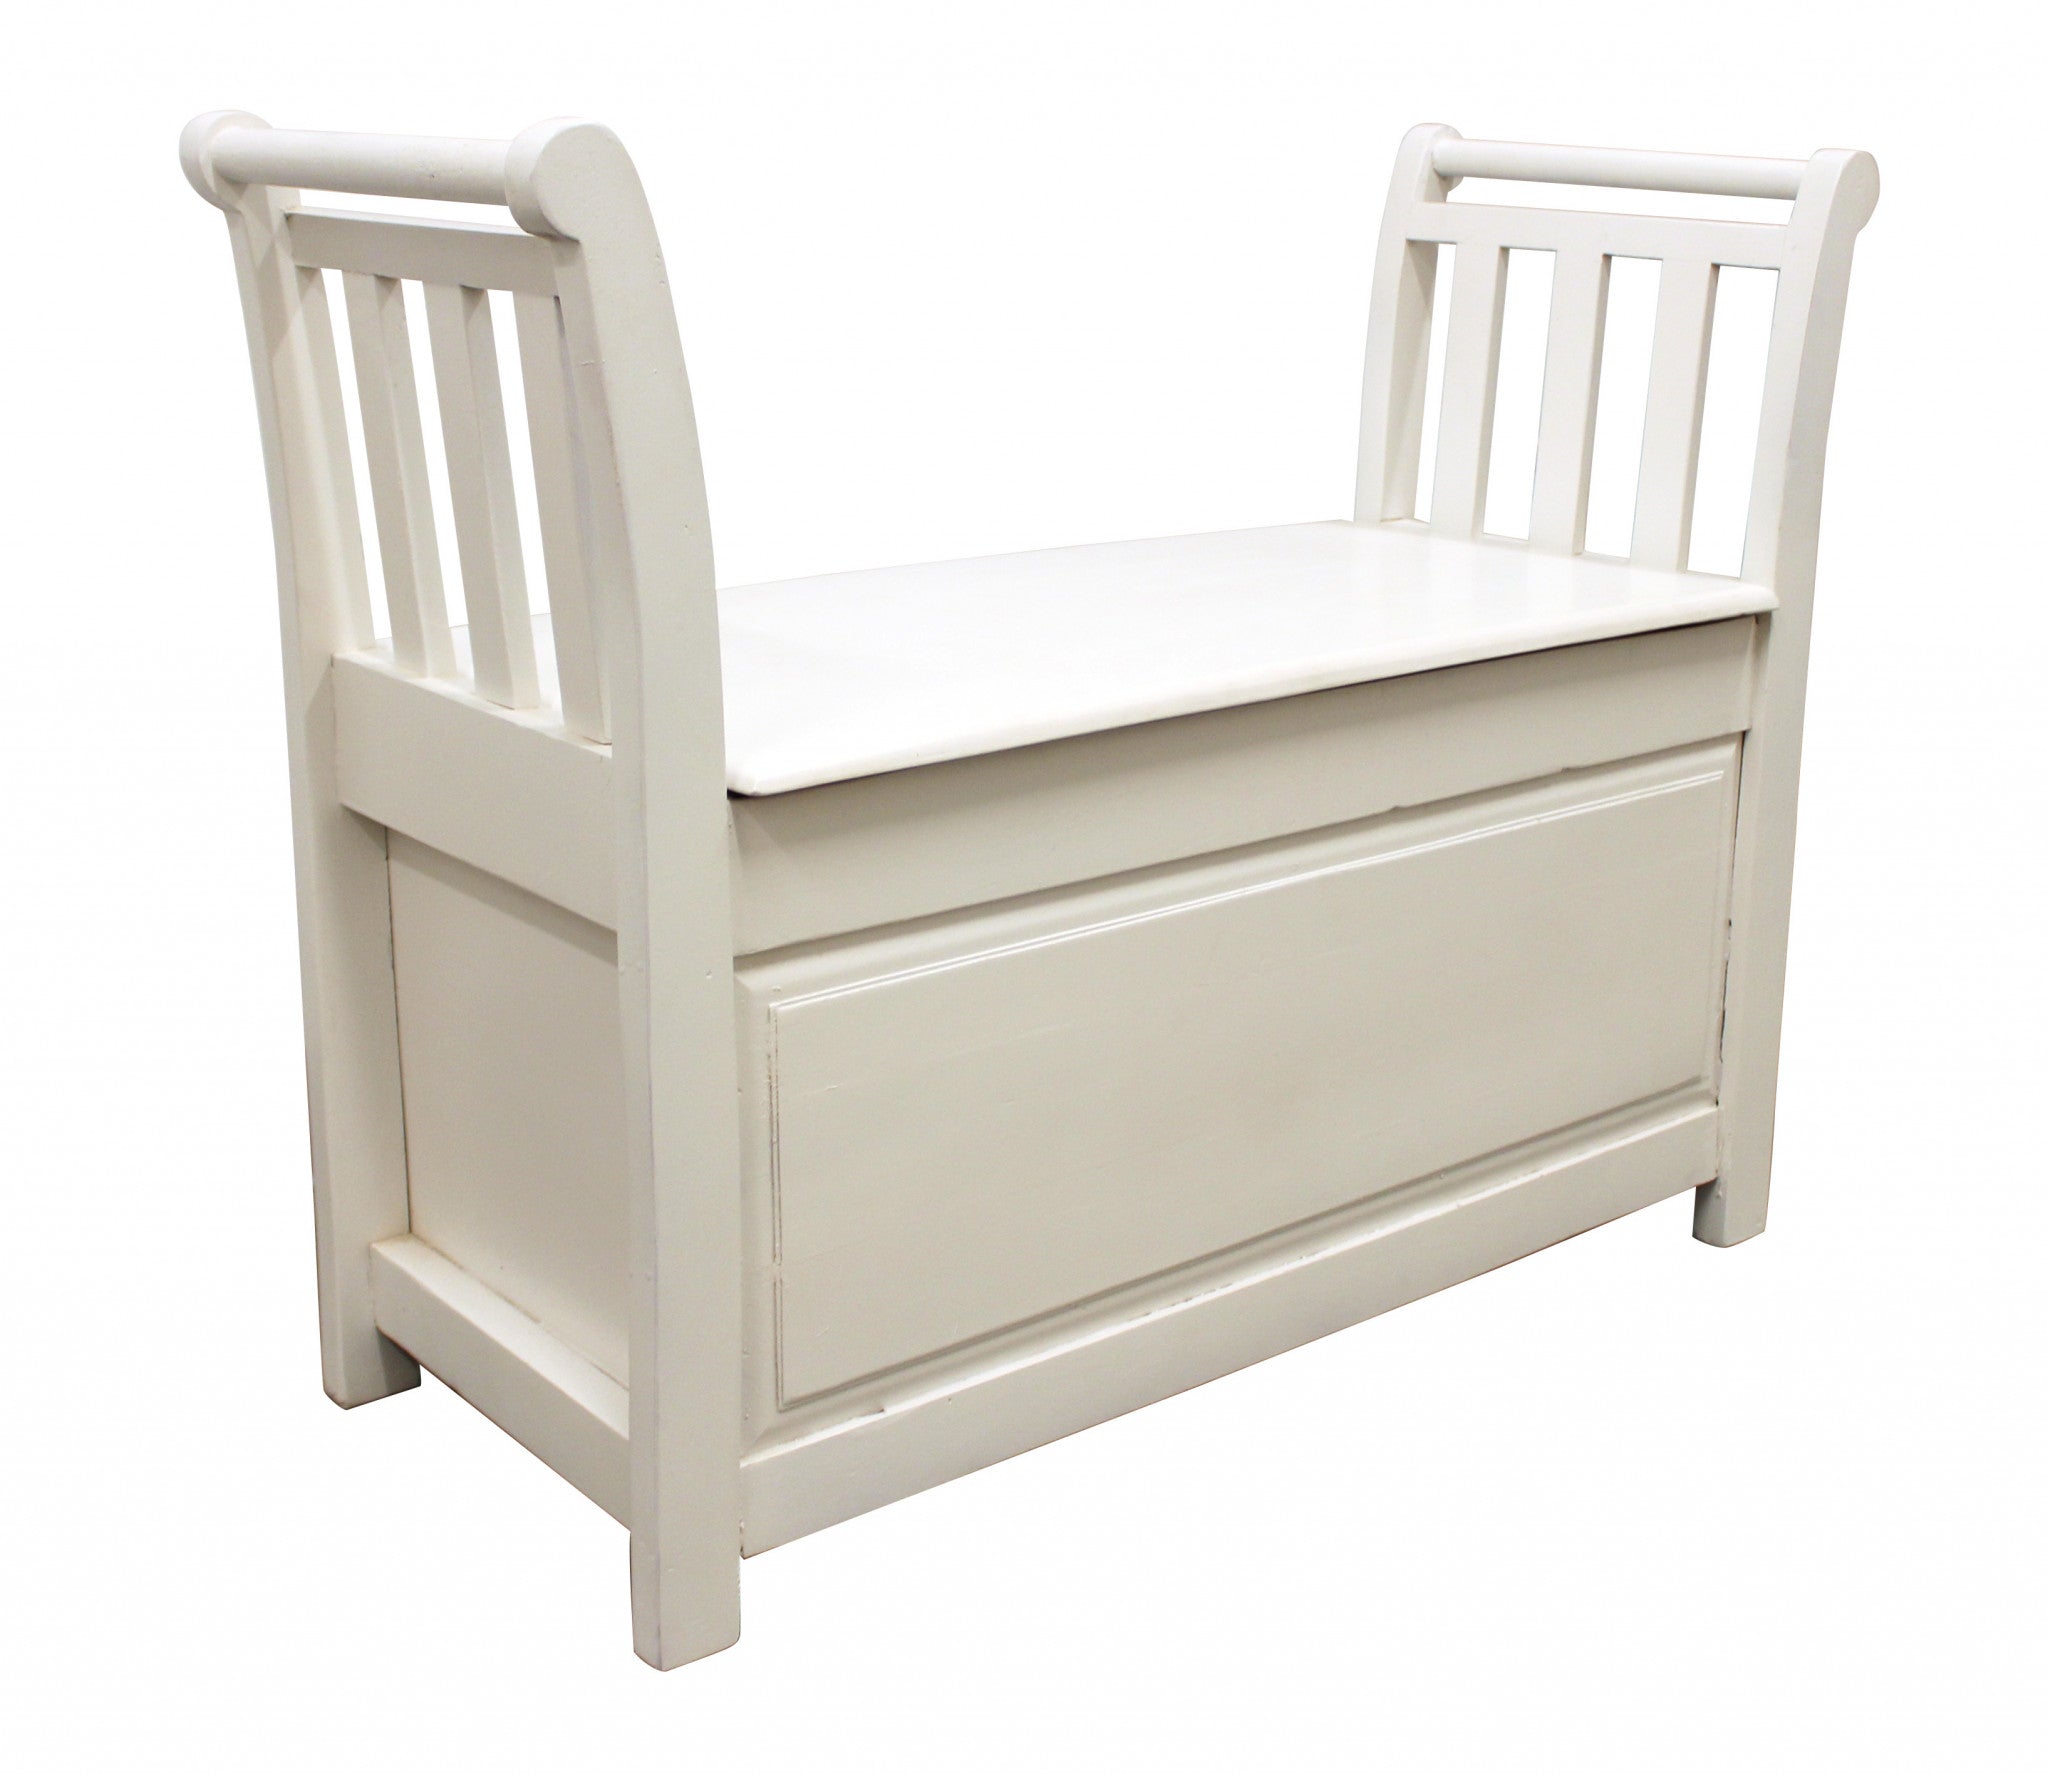 38" White Solid Wood Entryway Bench With Flip Top and High Sides